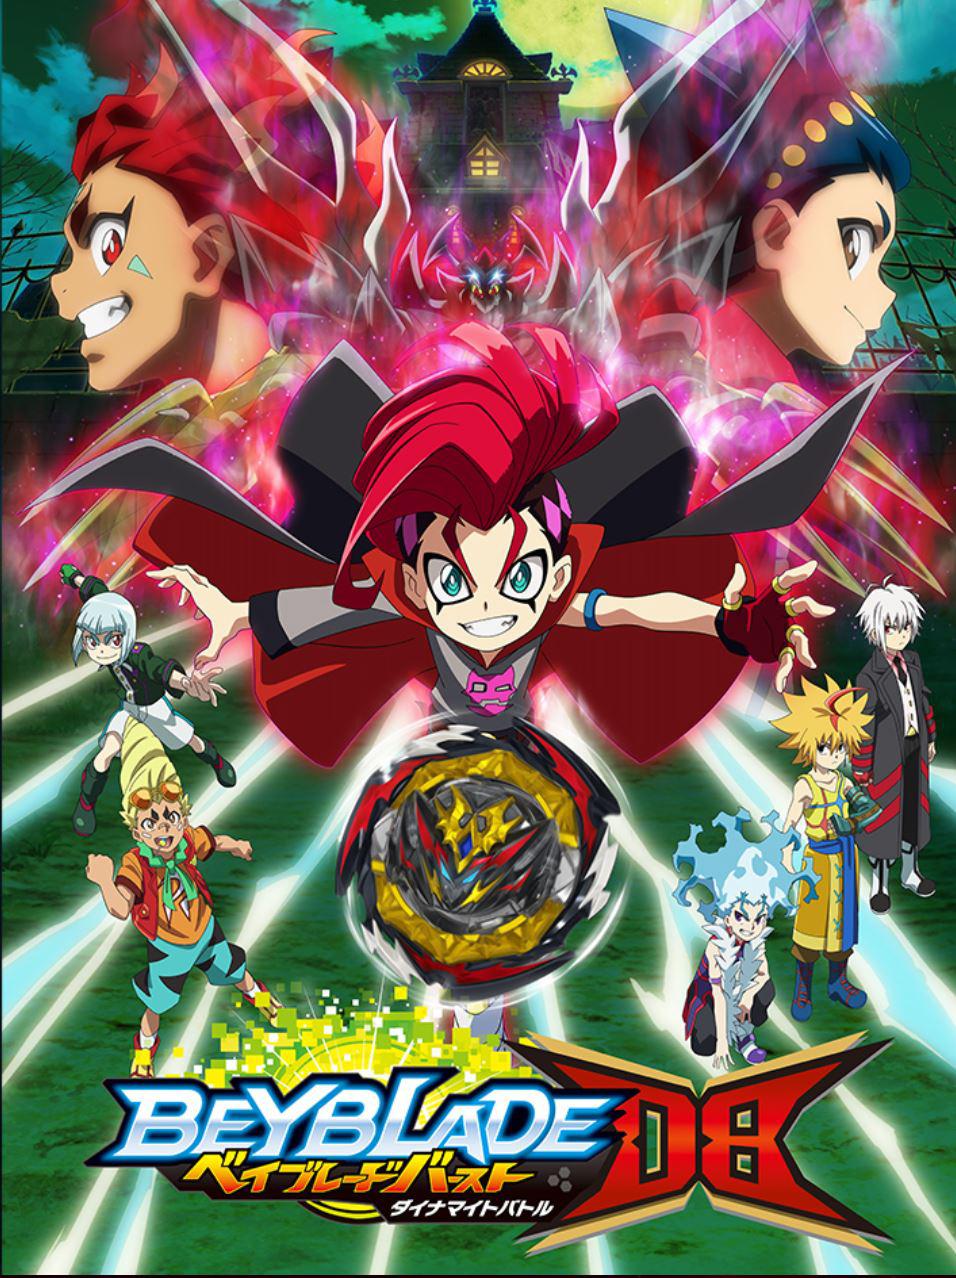 The official website and HD poster of Beyblade Burst Dynamite Battle just came out!